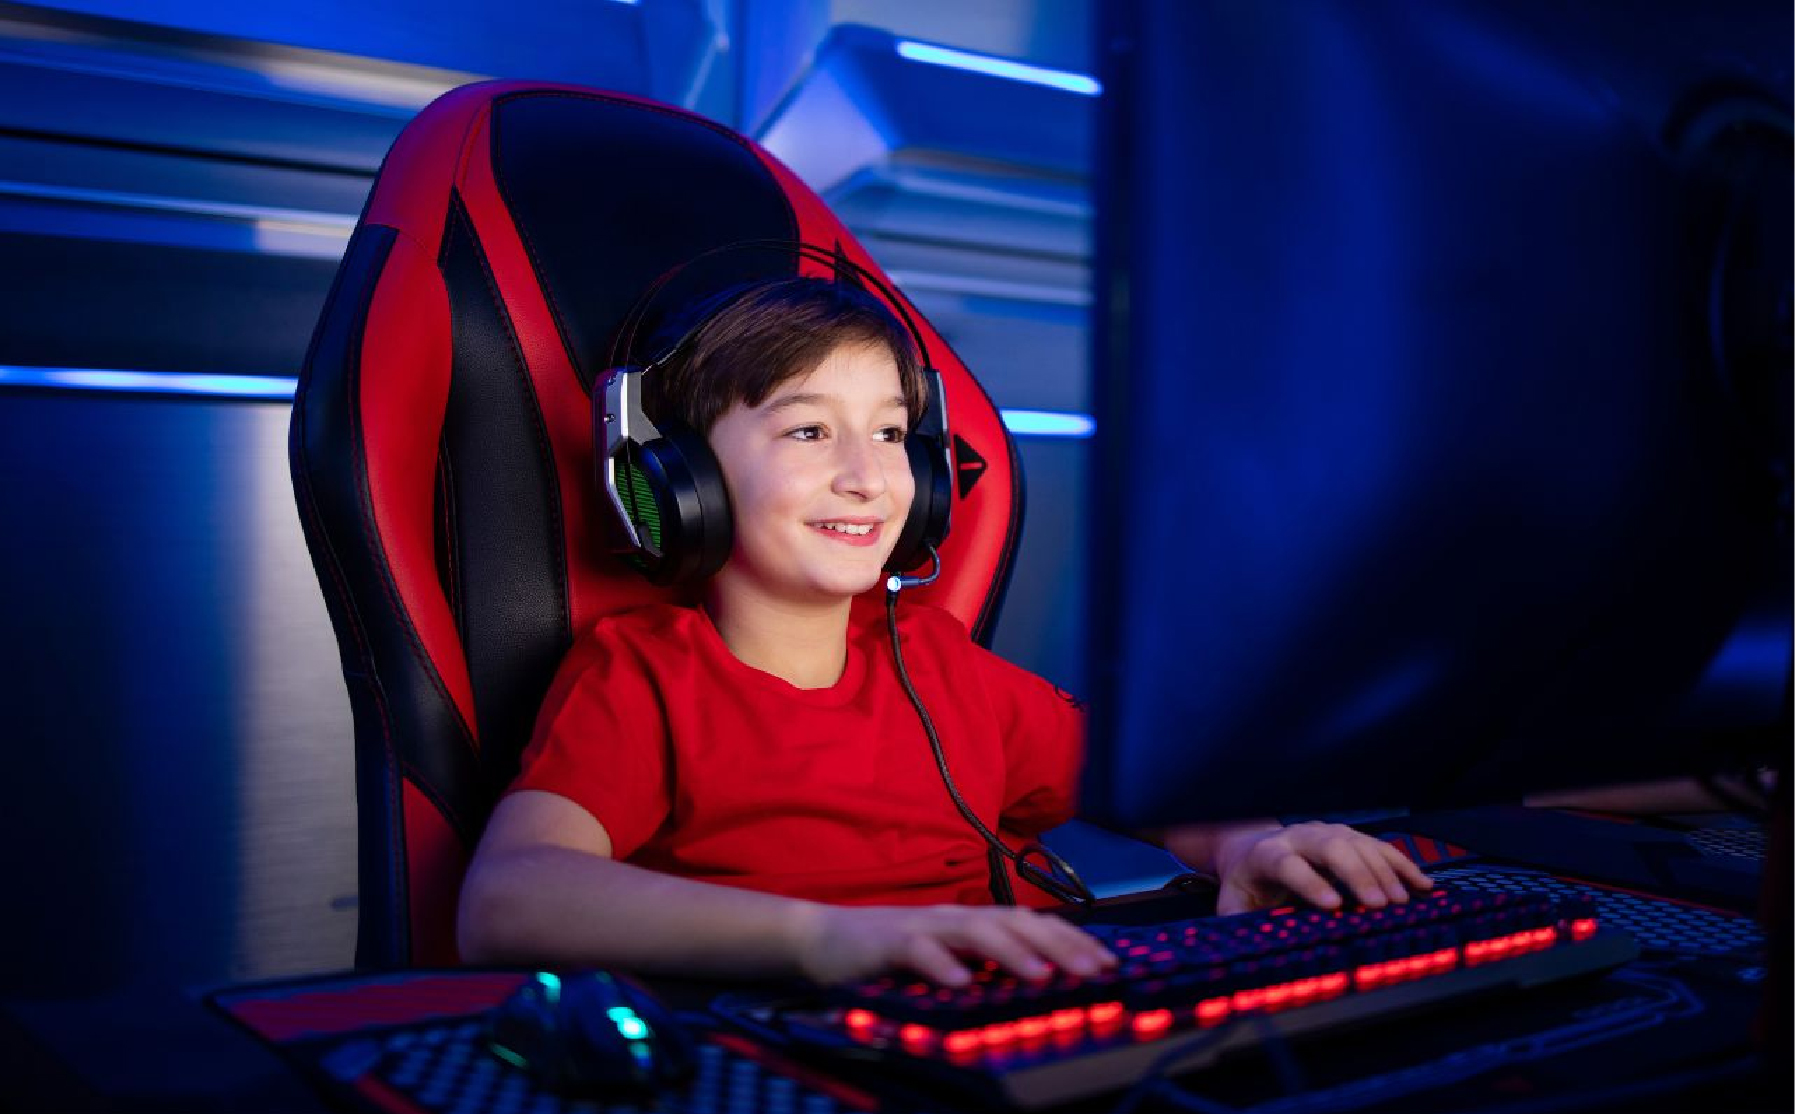 Leveling Up Together: How to Support Your Child’s Gaming Journey